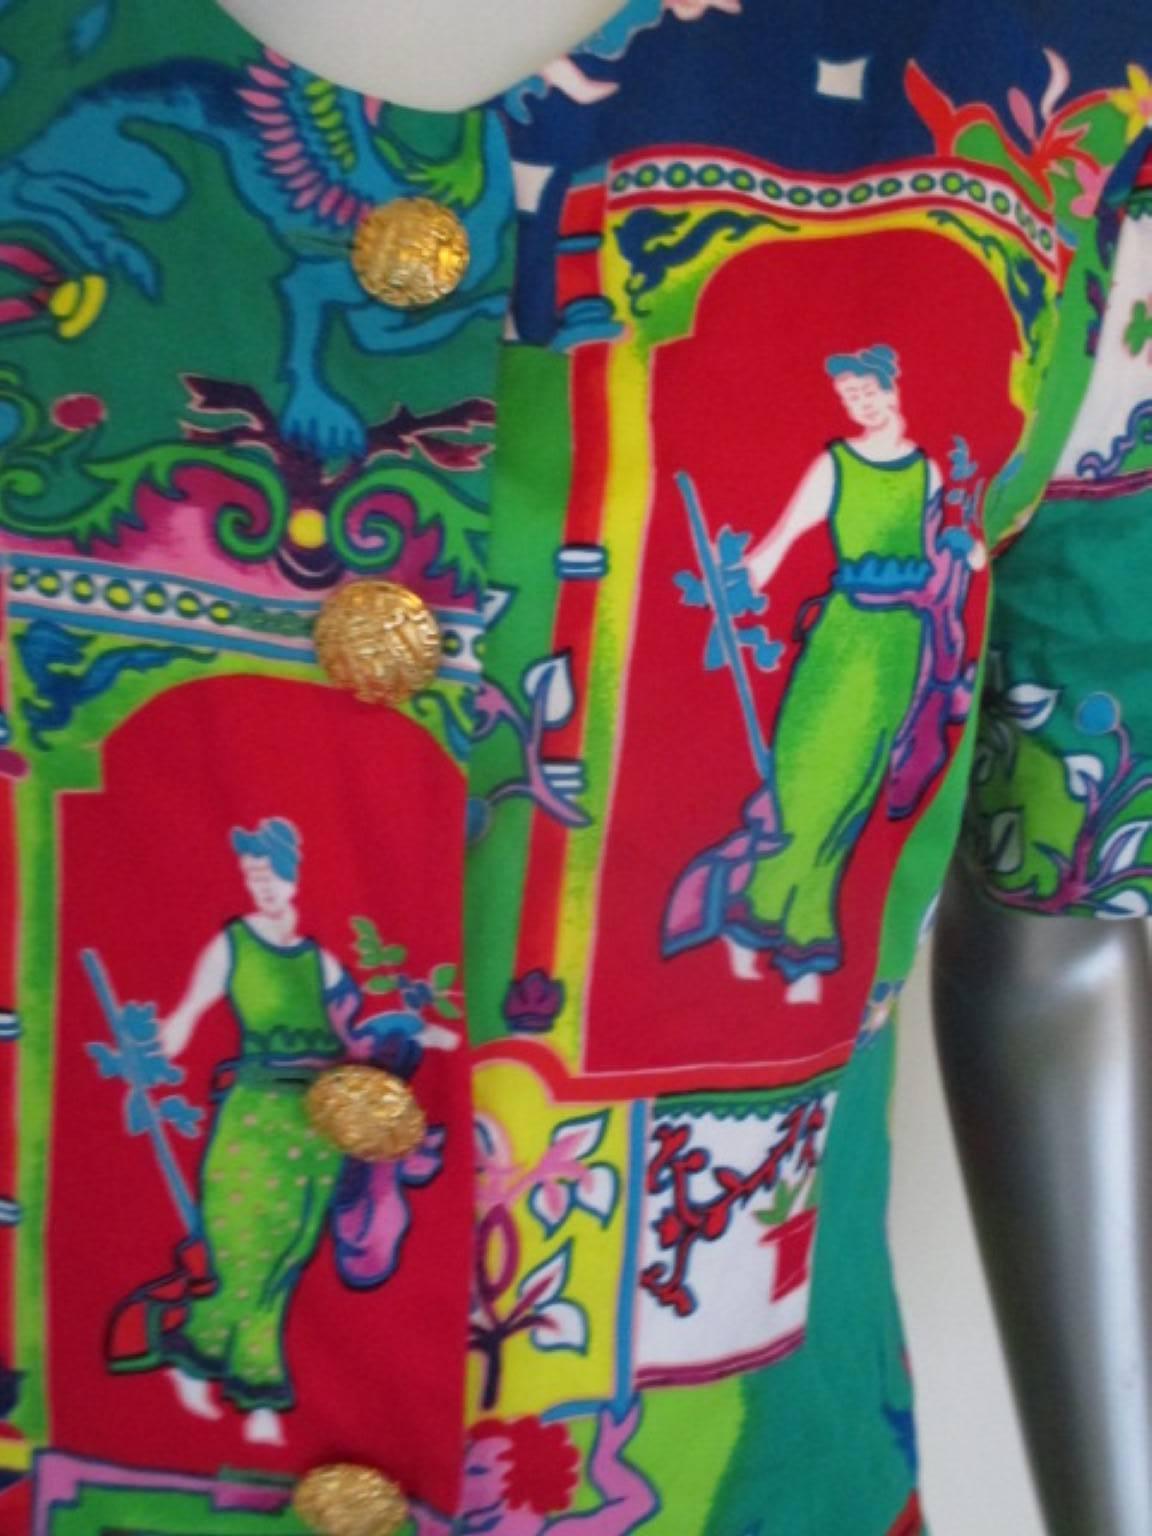 This extraordinarily colorful blazer is short sleeved, with padded shoulders.
The coat has 5 sculpted gold colored buttons with a Greco -Egyptian design.
The size is medium
Please note that vintage items are not new and therefore might have minor